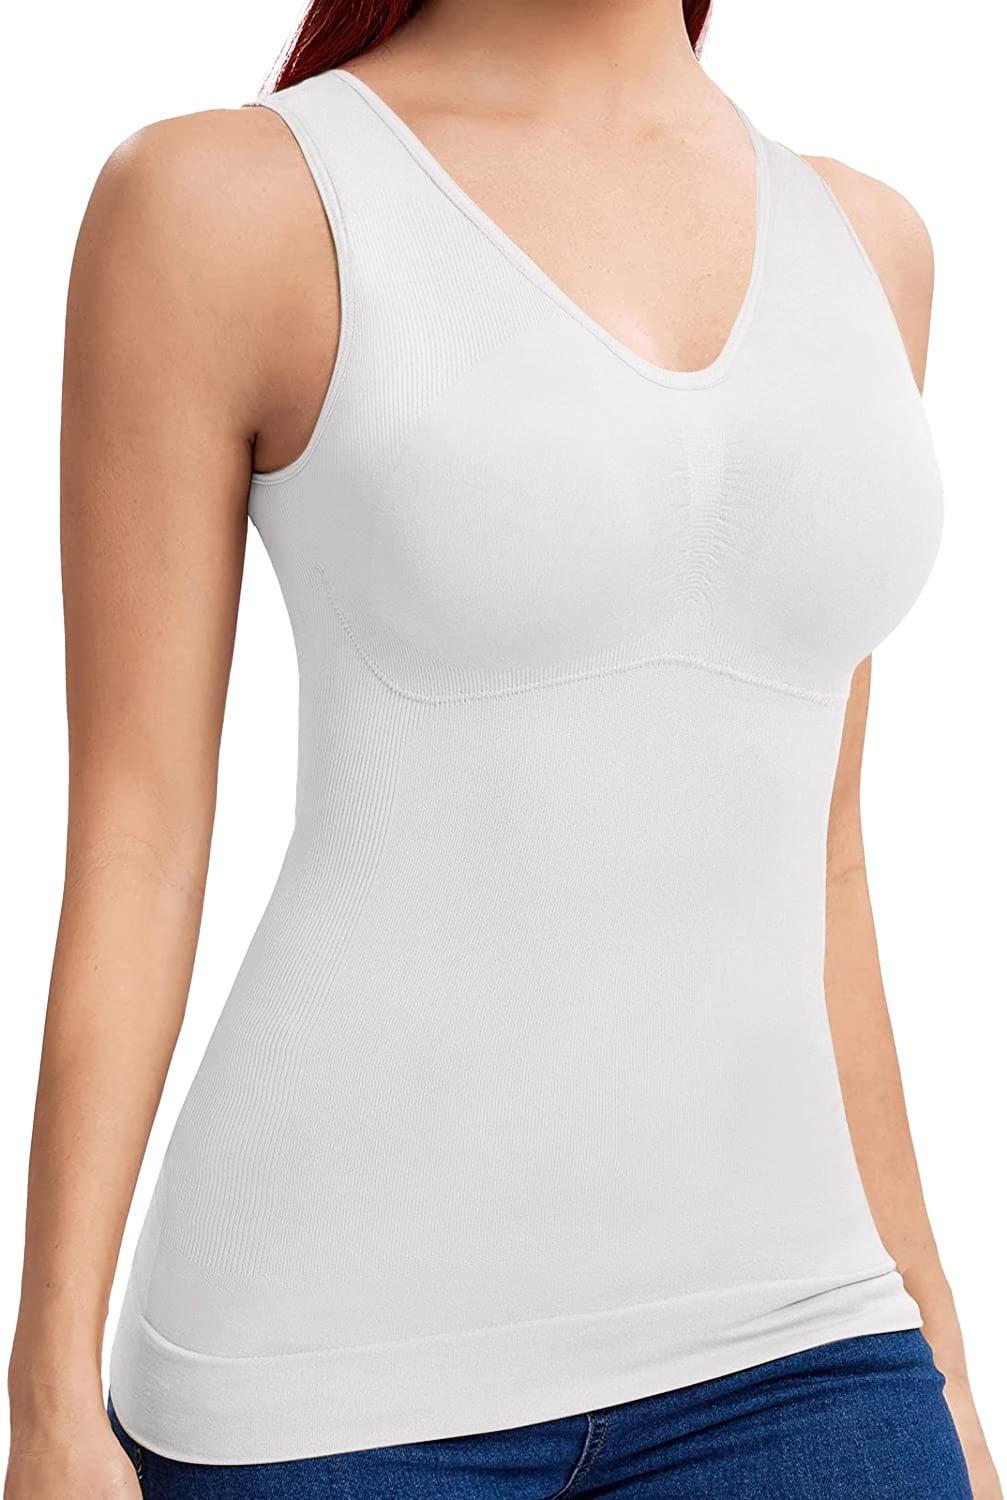 Spanx Cami Tank Shaping Top Targeted Shaper and 50 similar items